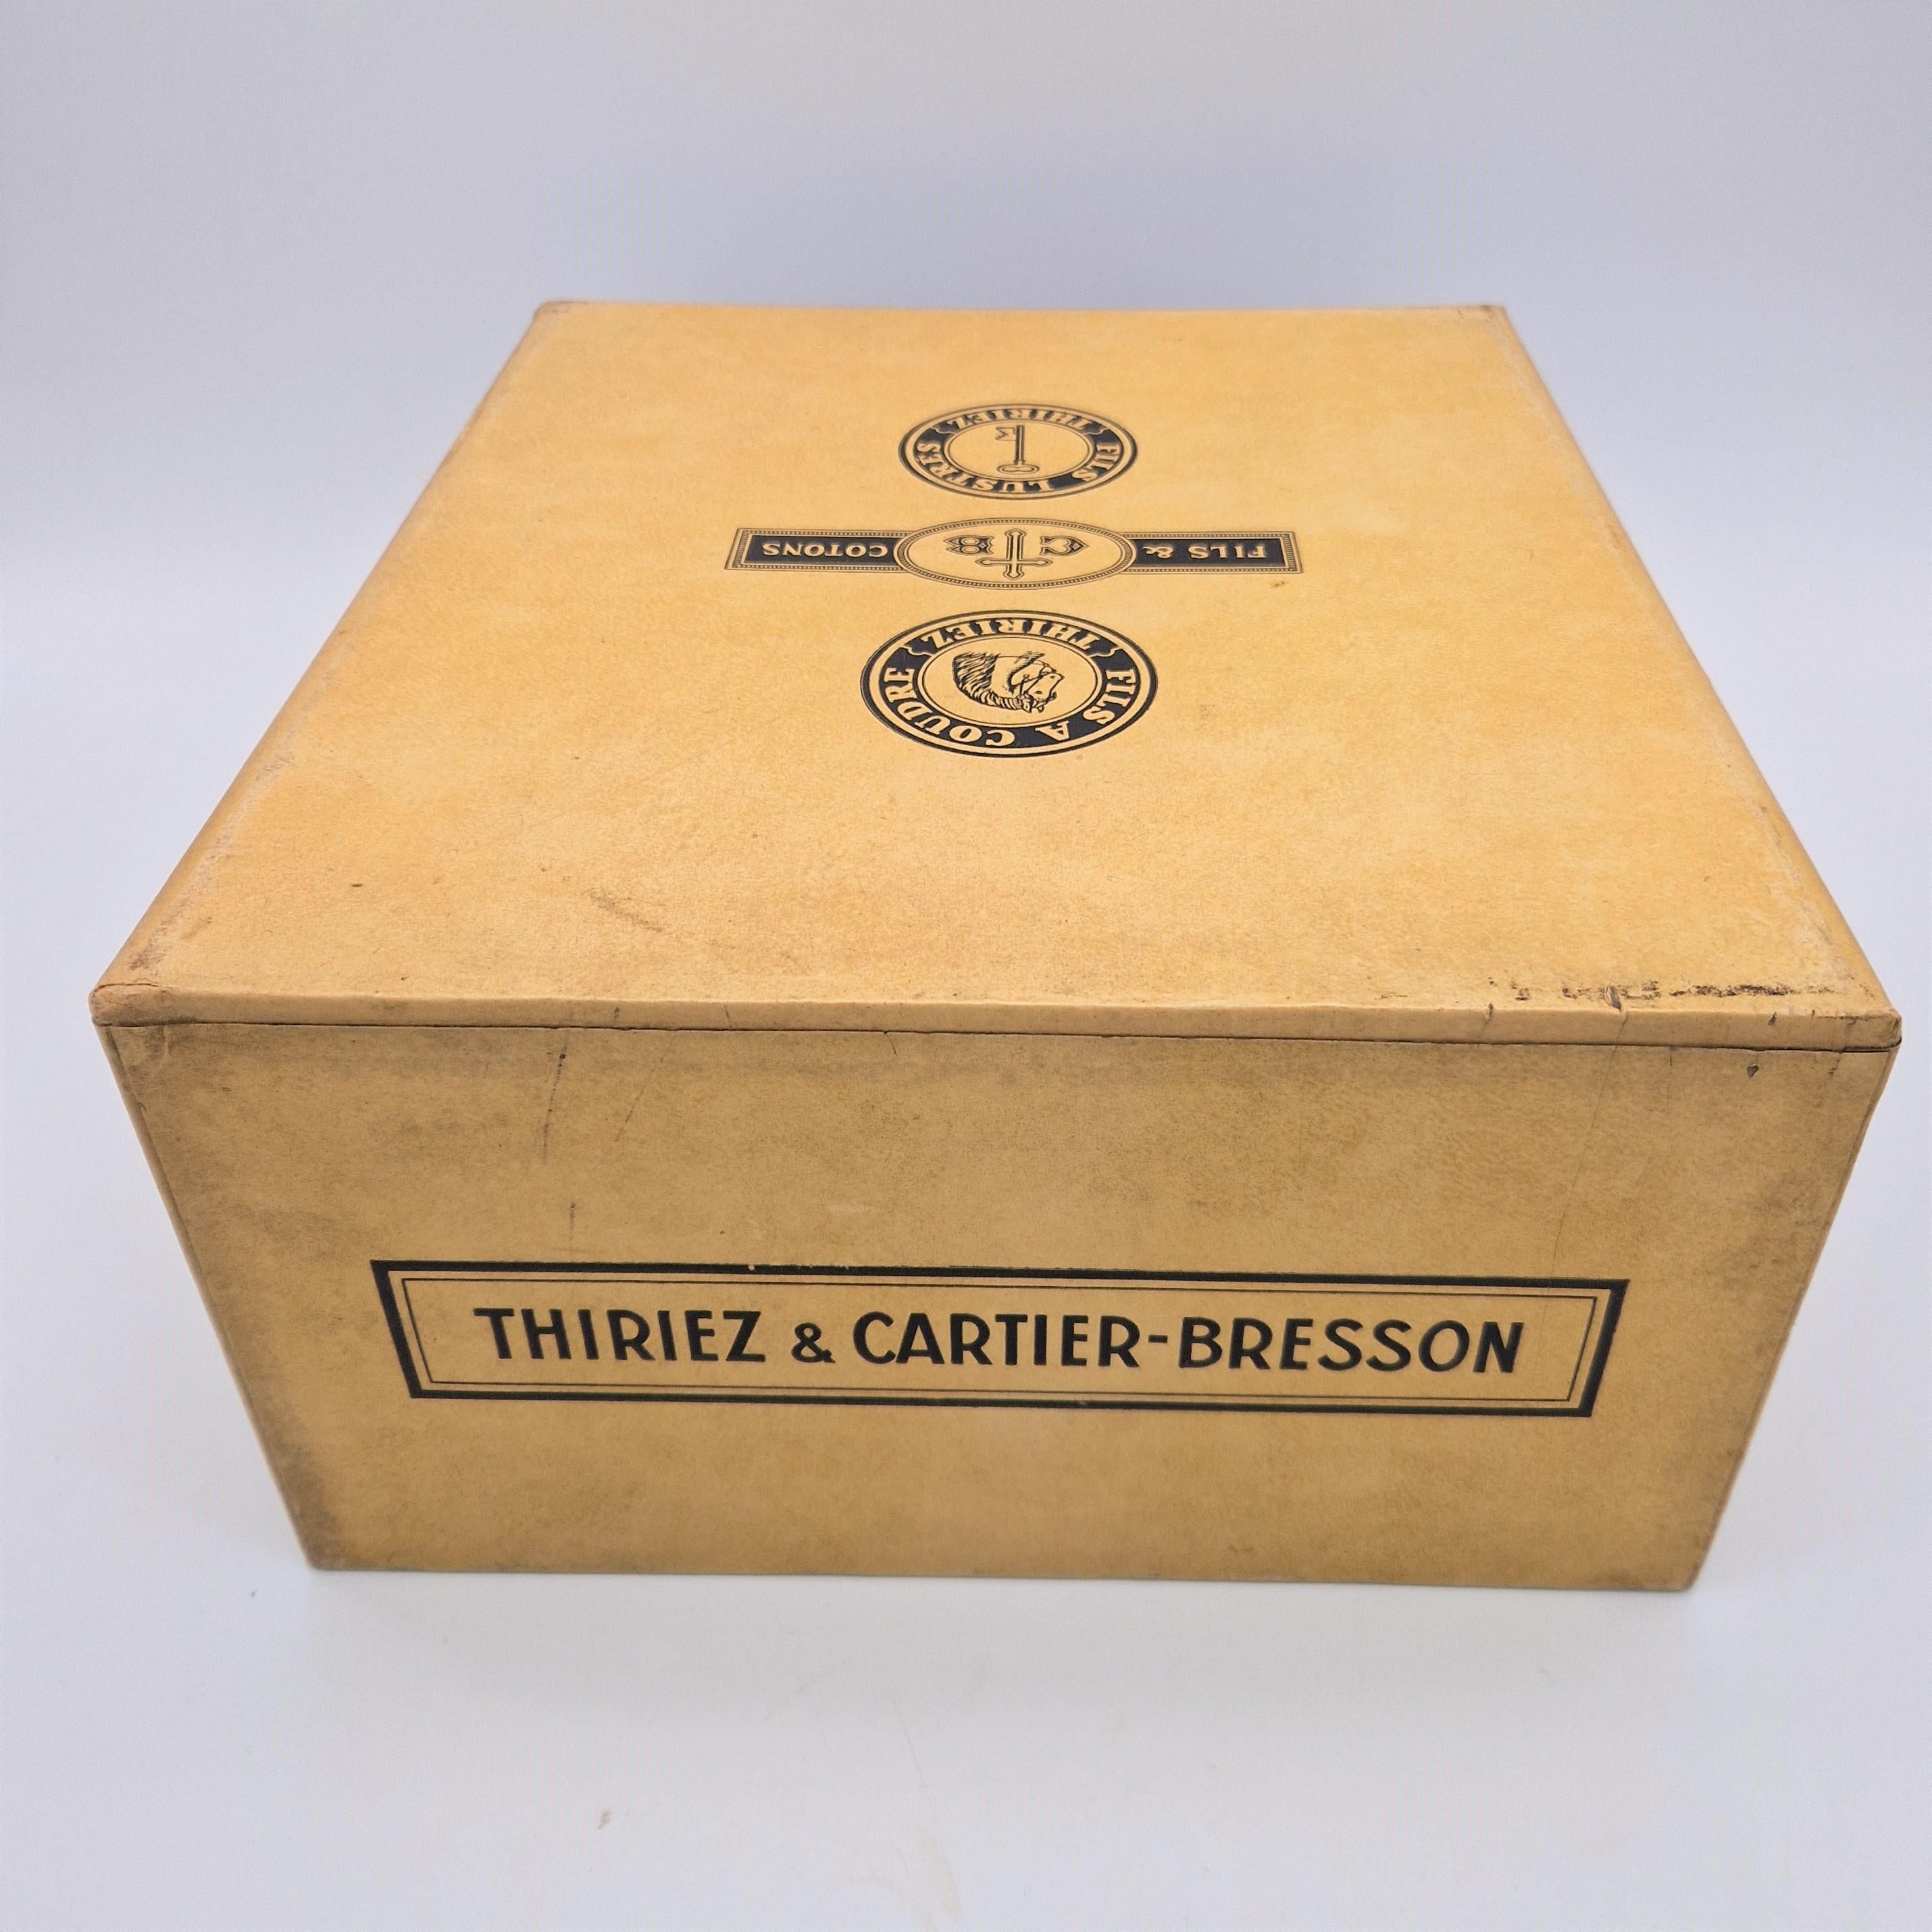 Haberdashery chest of drawers by Thiriez & Cartier Bresson. 1910 - 1920 For Sale 4